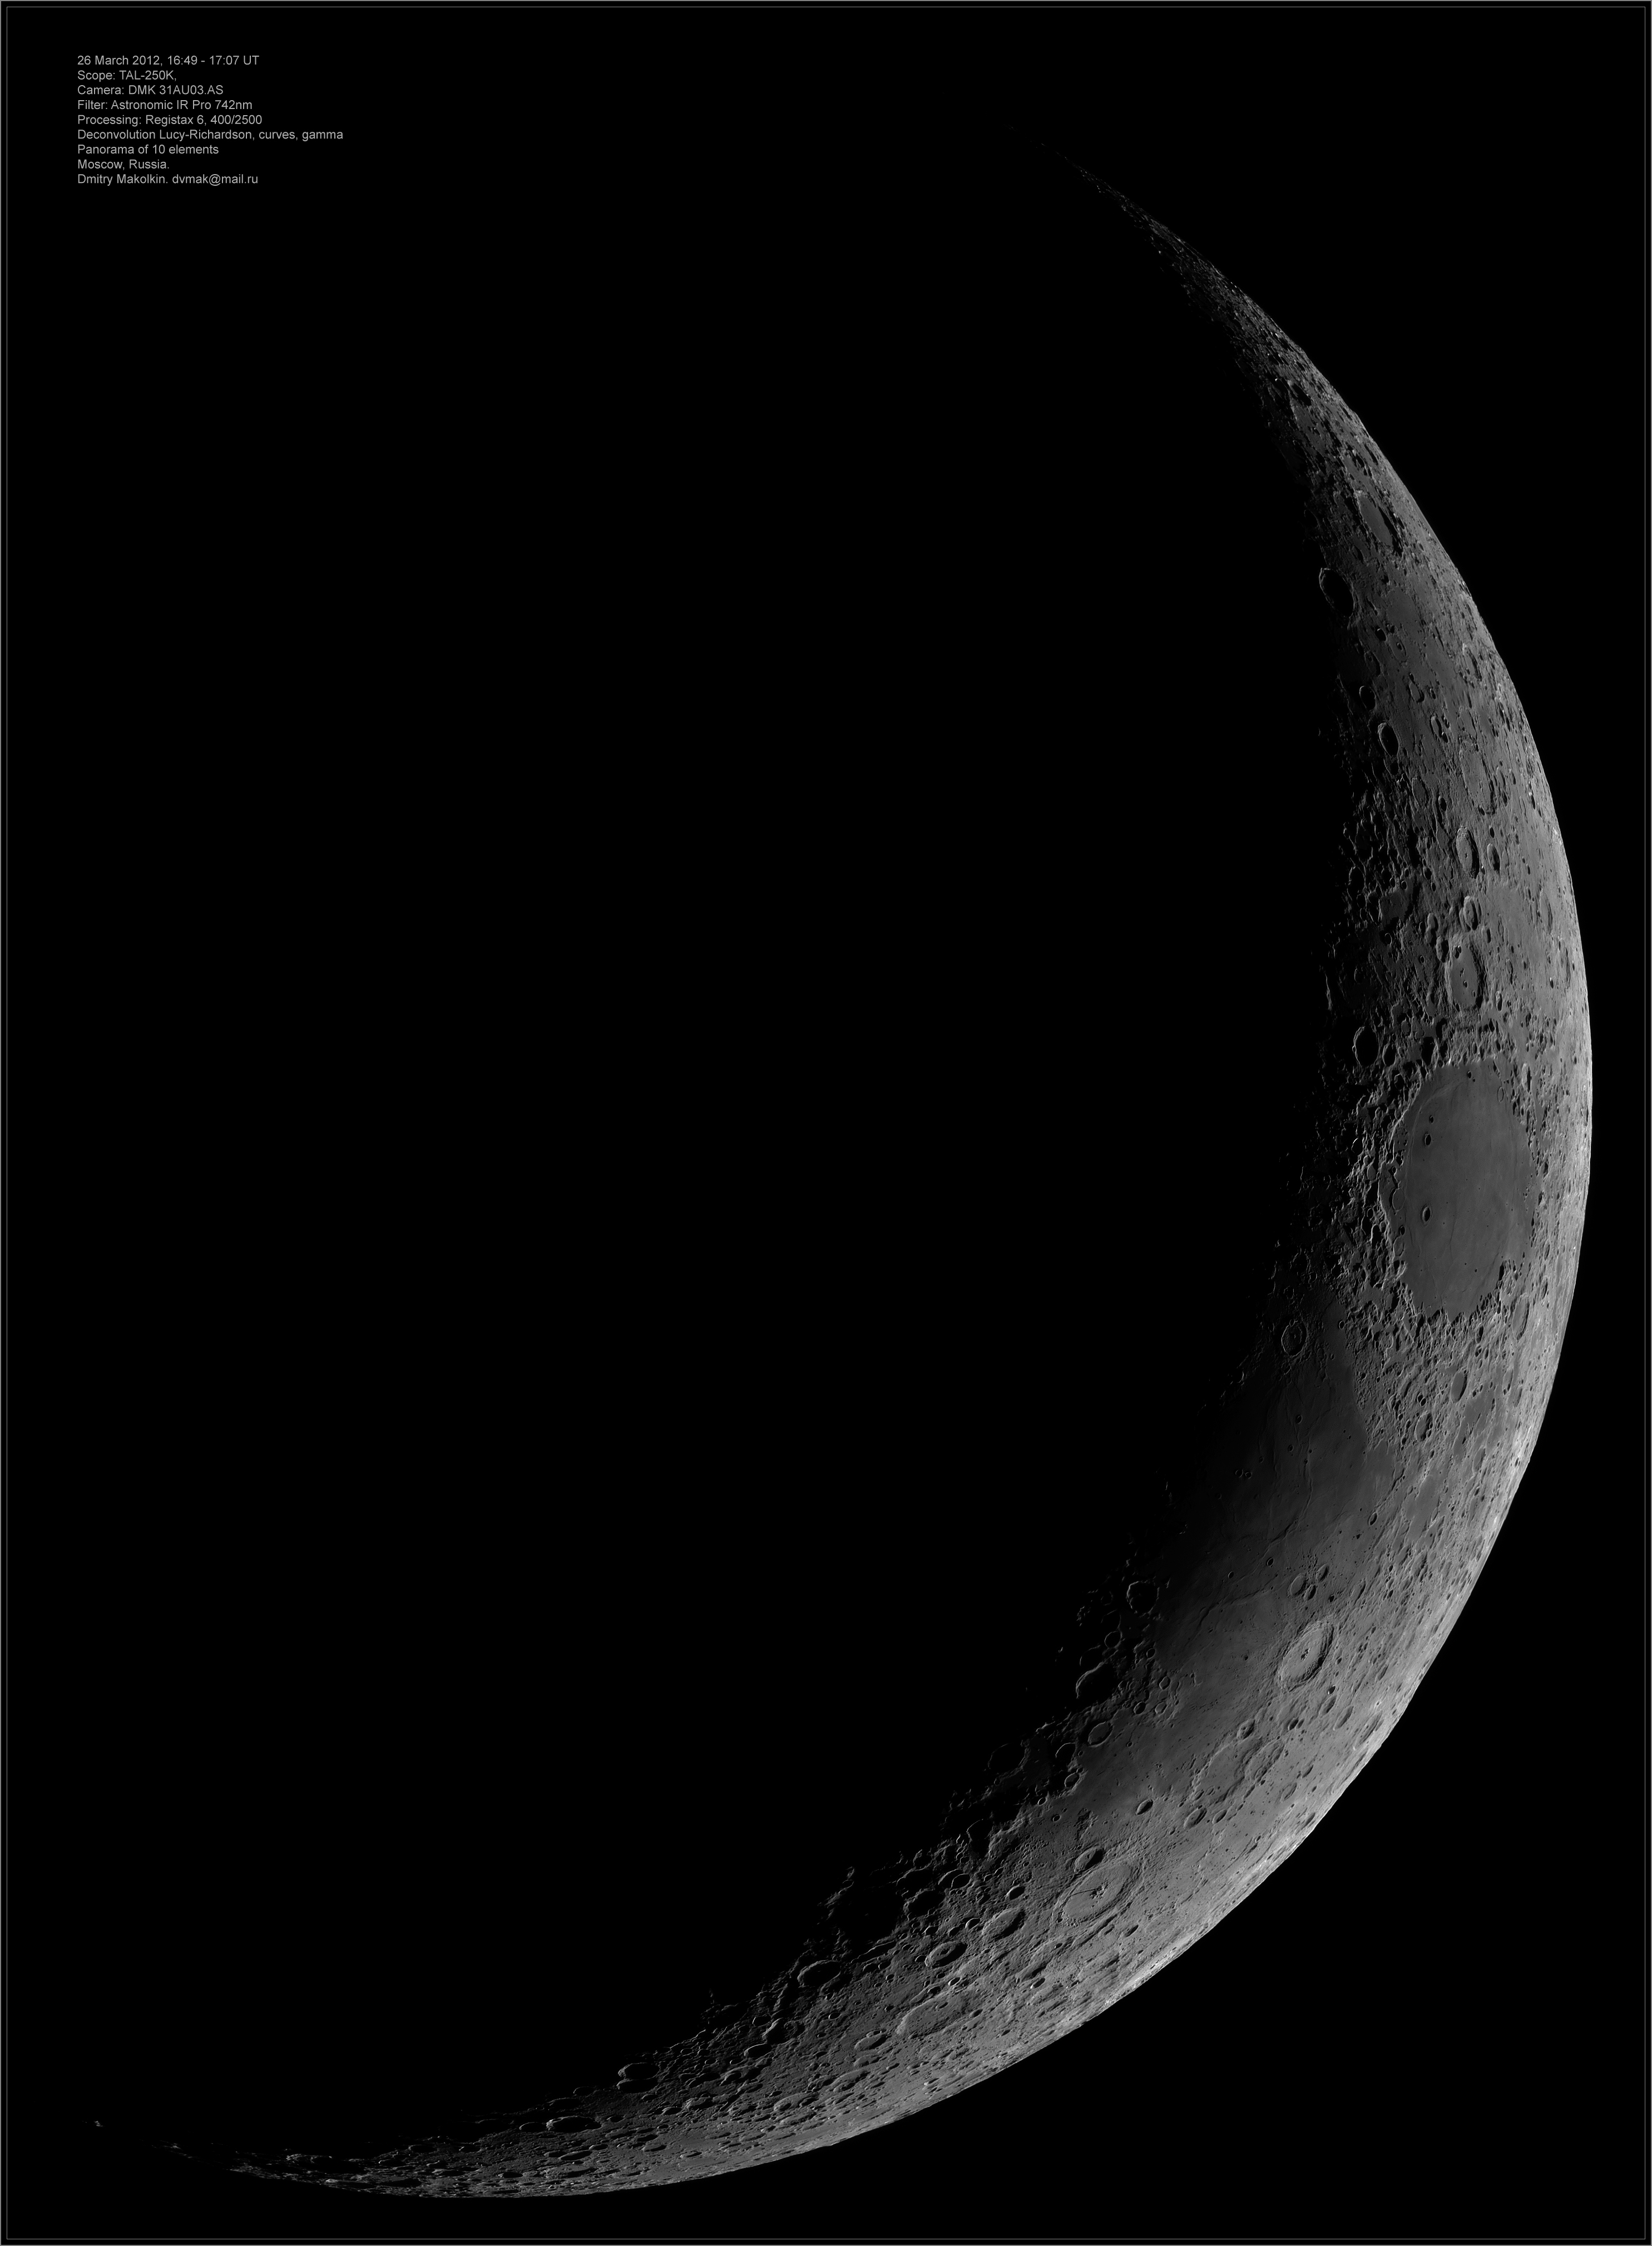 Moon image 25 March 2012